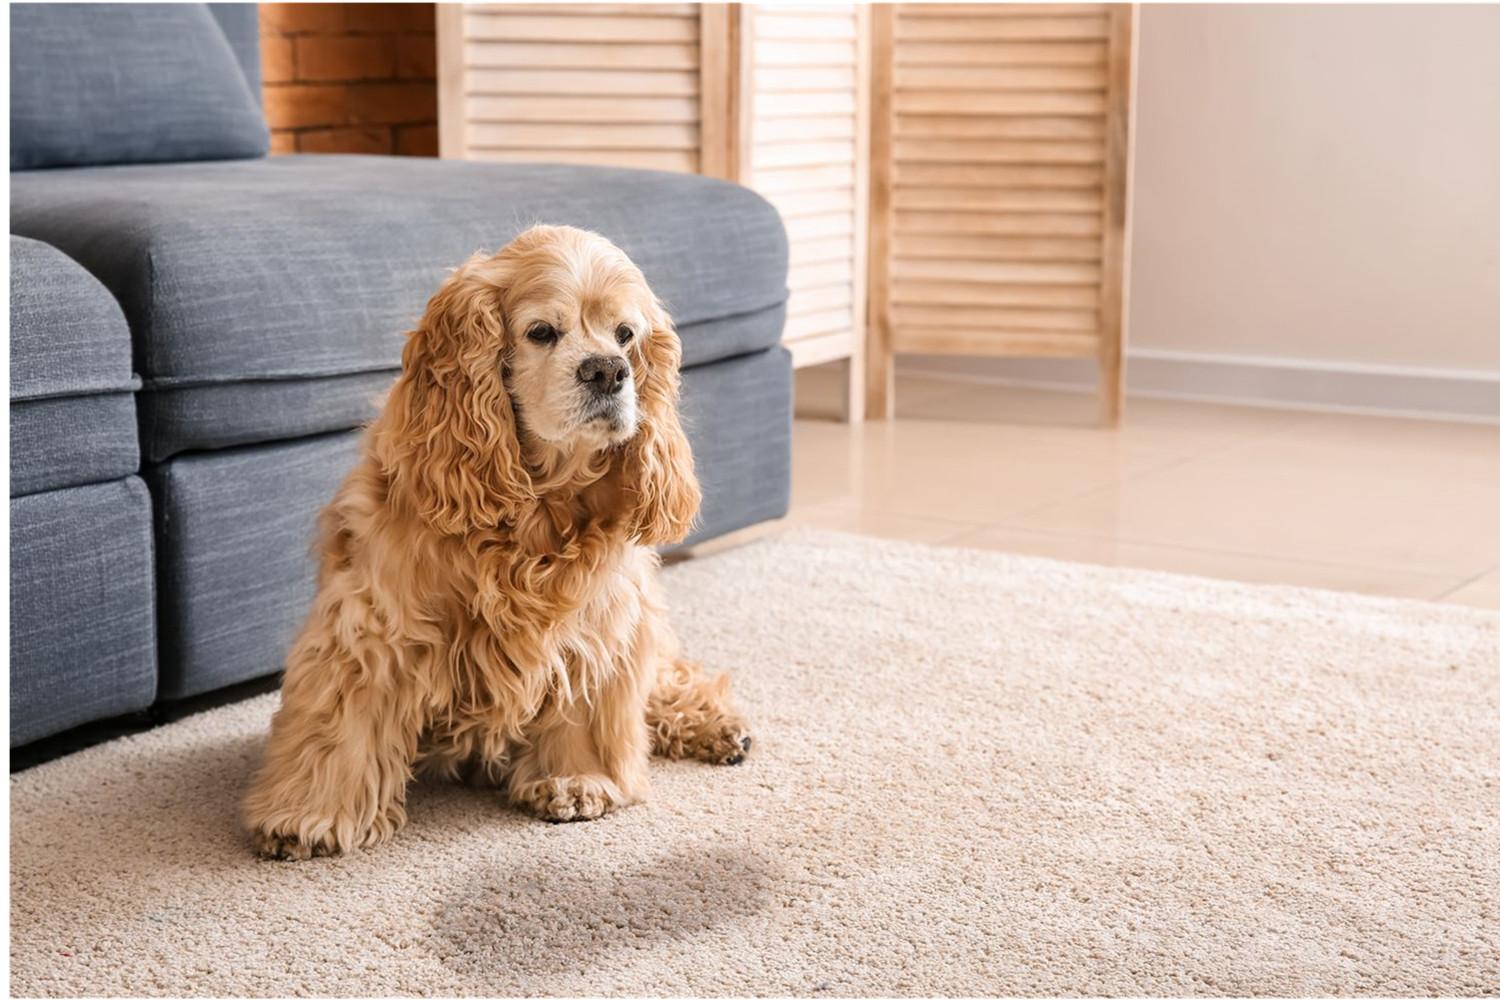 Dog Peeing In The House? What To Do？Know Important Dog Training Tips.